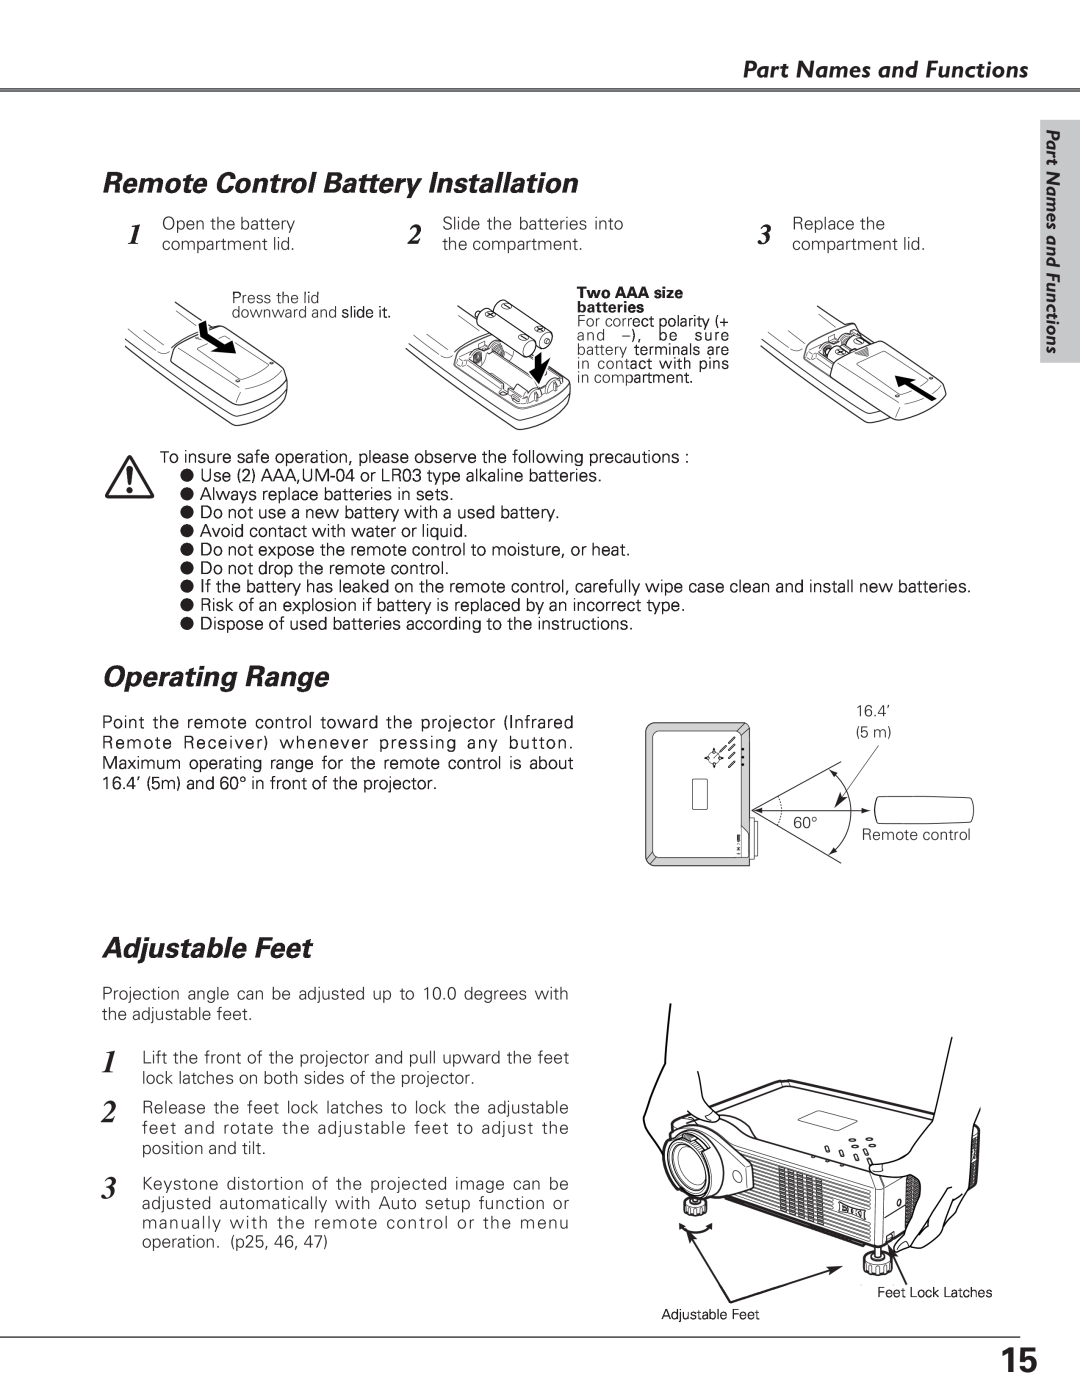 Eiki LC-XB27 owner manual Remote Control Battery Installation, Operating Range, Adjustable Feet, Part Names and Functions 